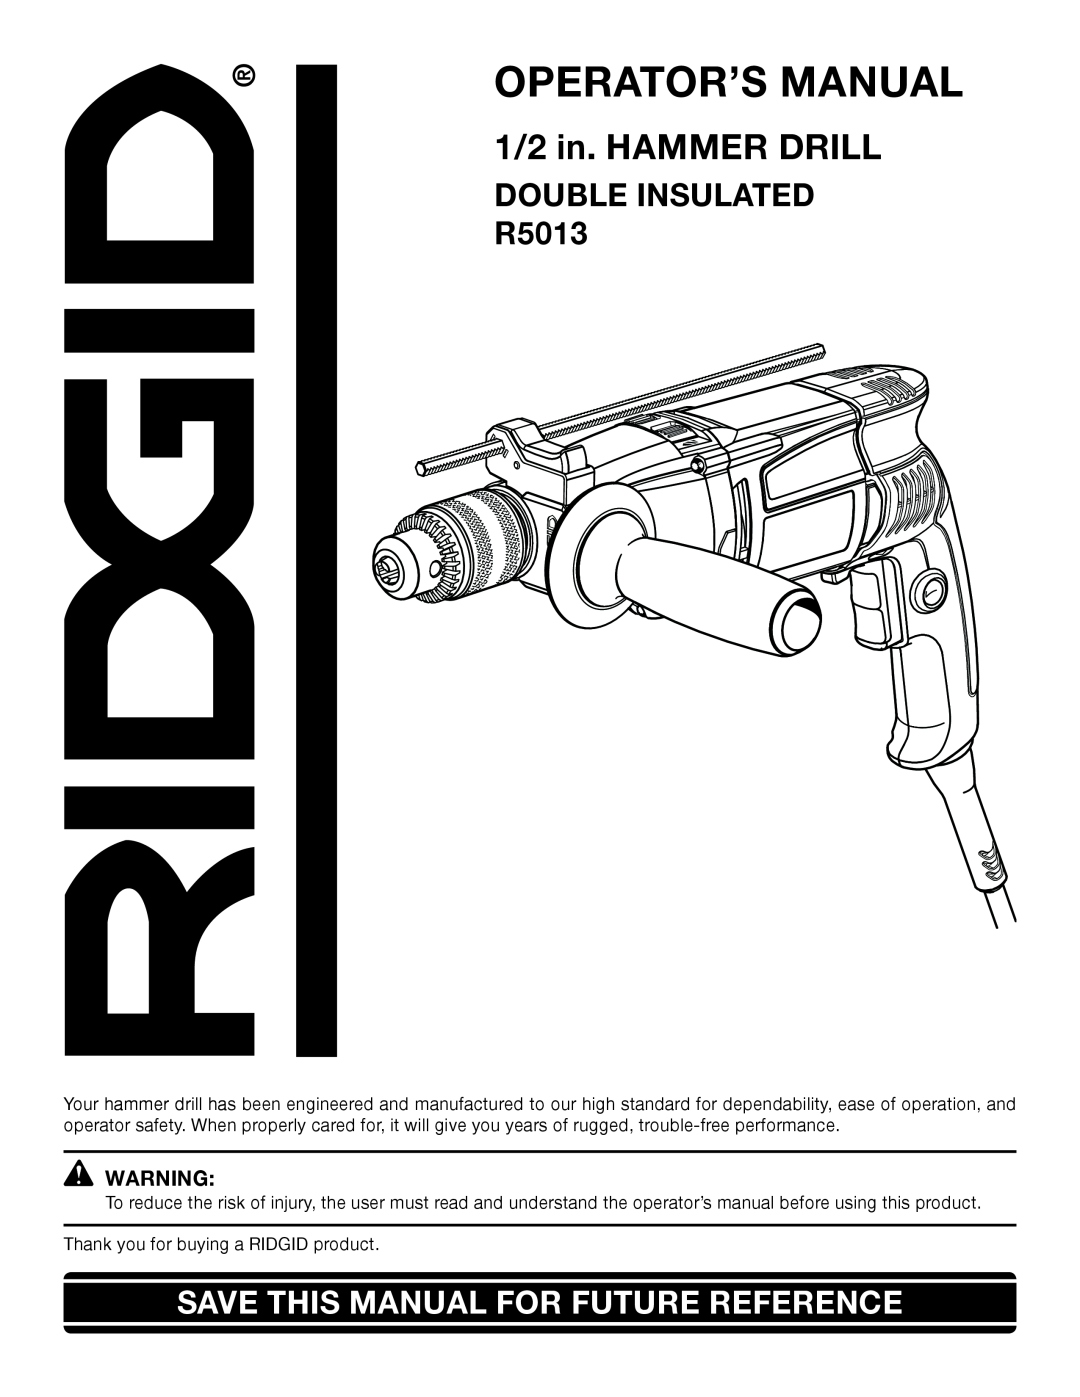 RIDGID manual Operator’S Manual, 1/2 in. HAMMER DRILL, DOUBLE INSULATED R5013, Save This Manual For Future Reference 